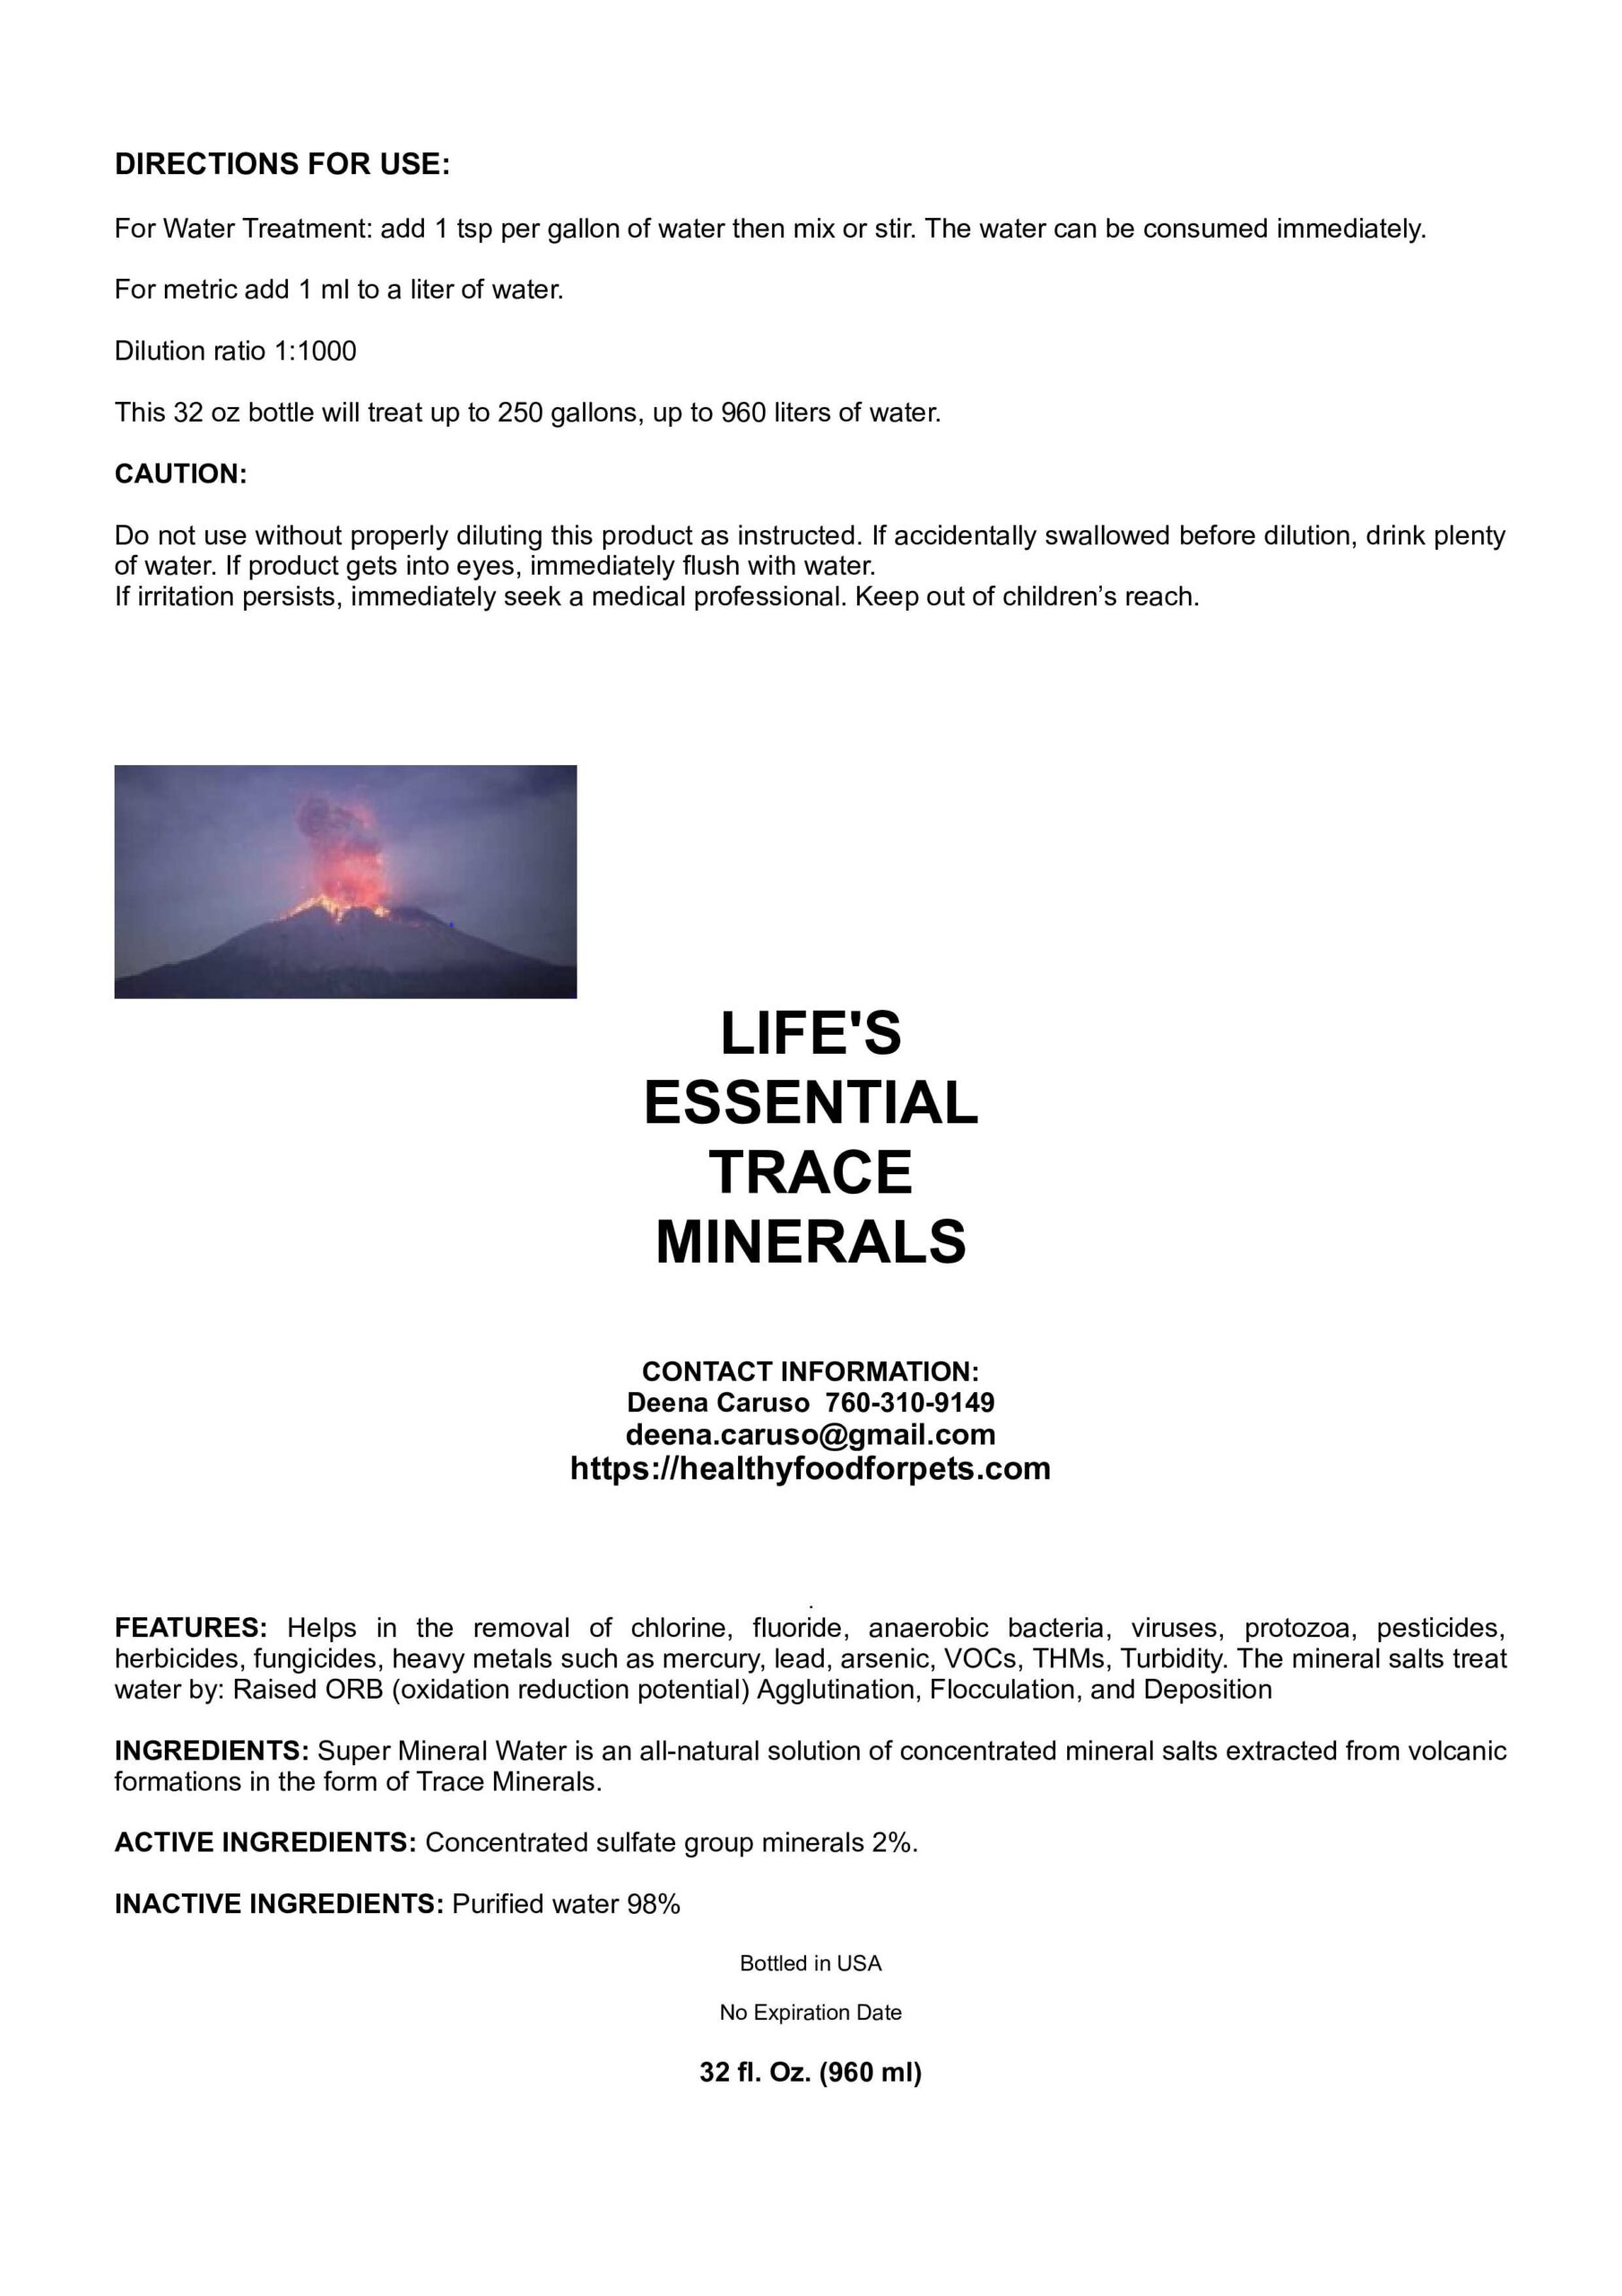 Label_Life’s_Essential_Trace_Minerals